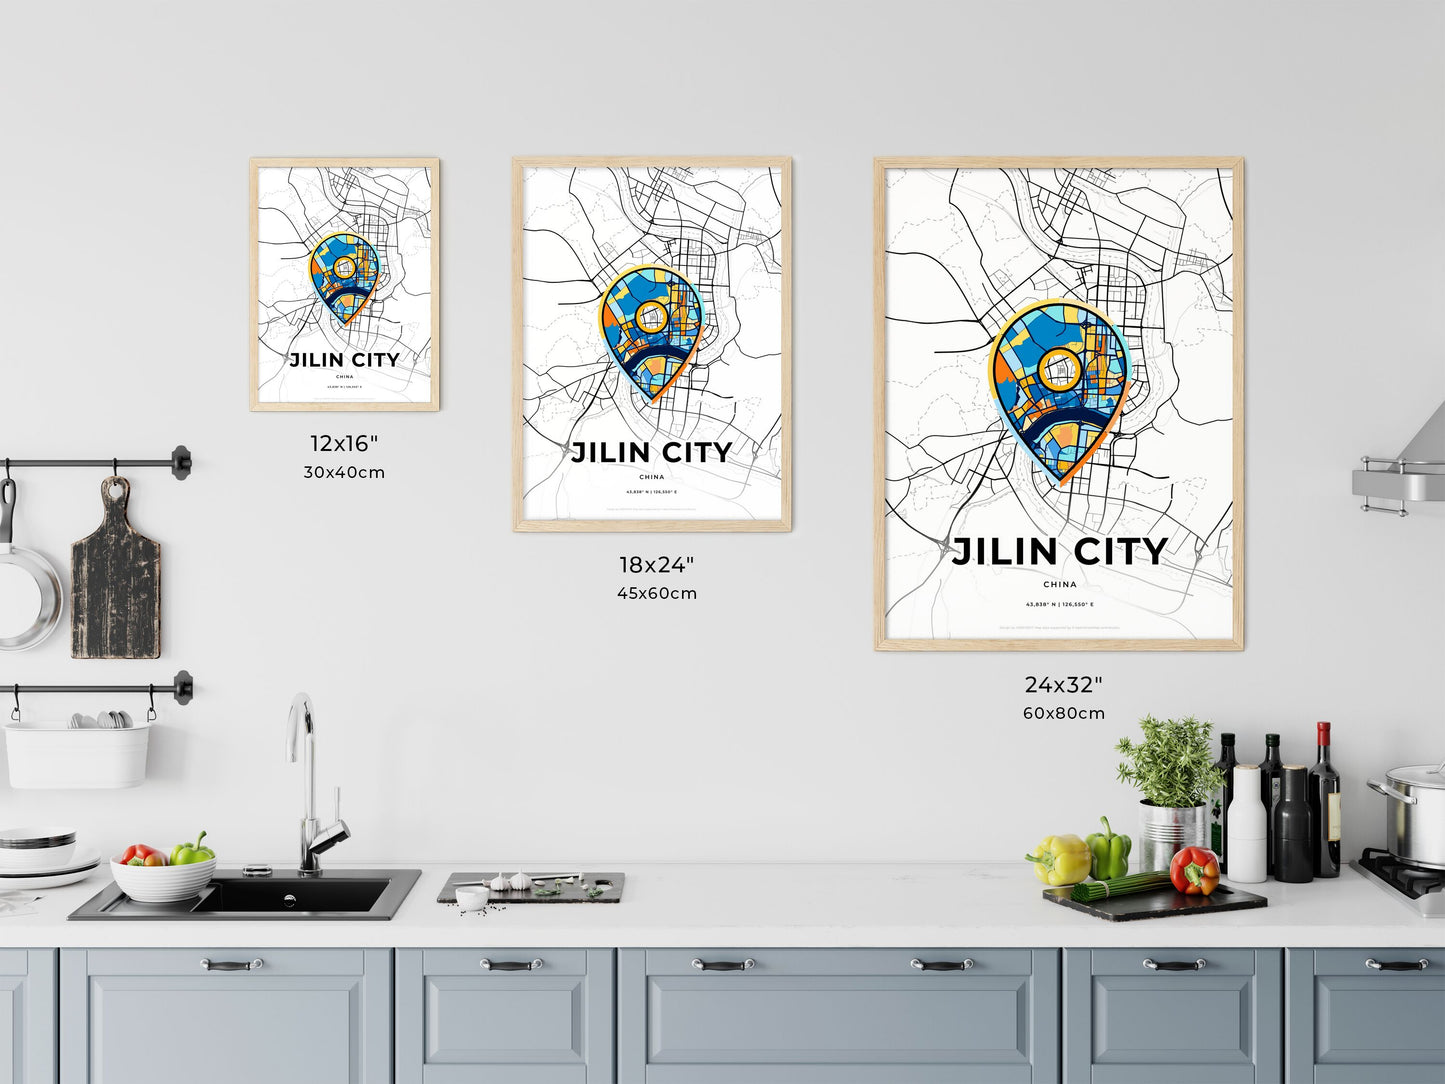 JILIN CITY CHINA minimal art map with a colorful icon. Where it all began, Couple map gift.